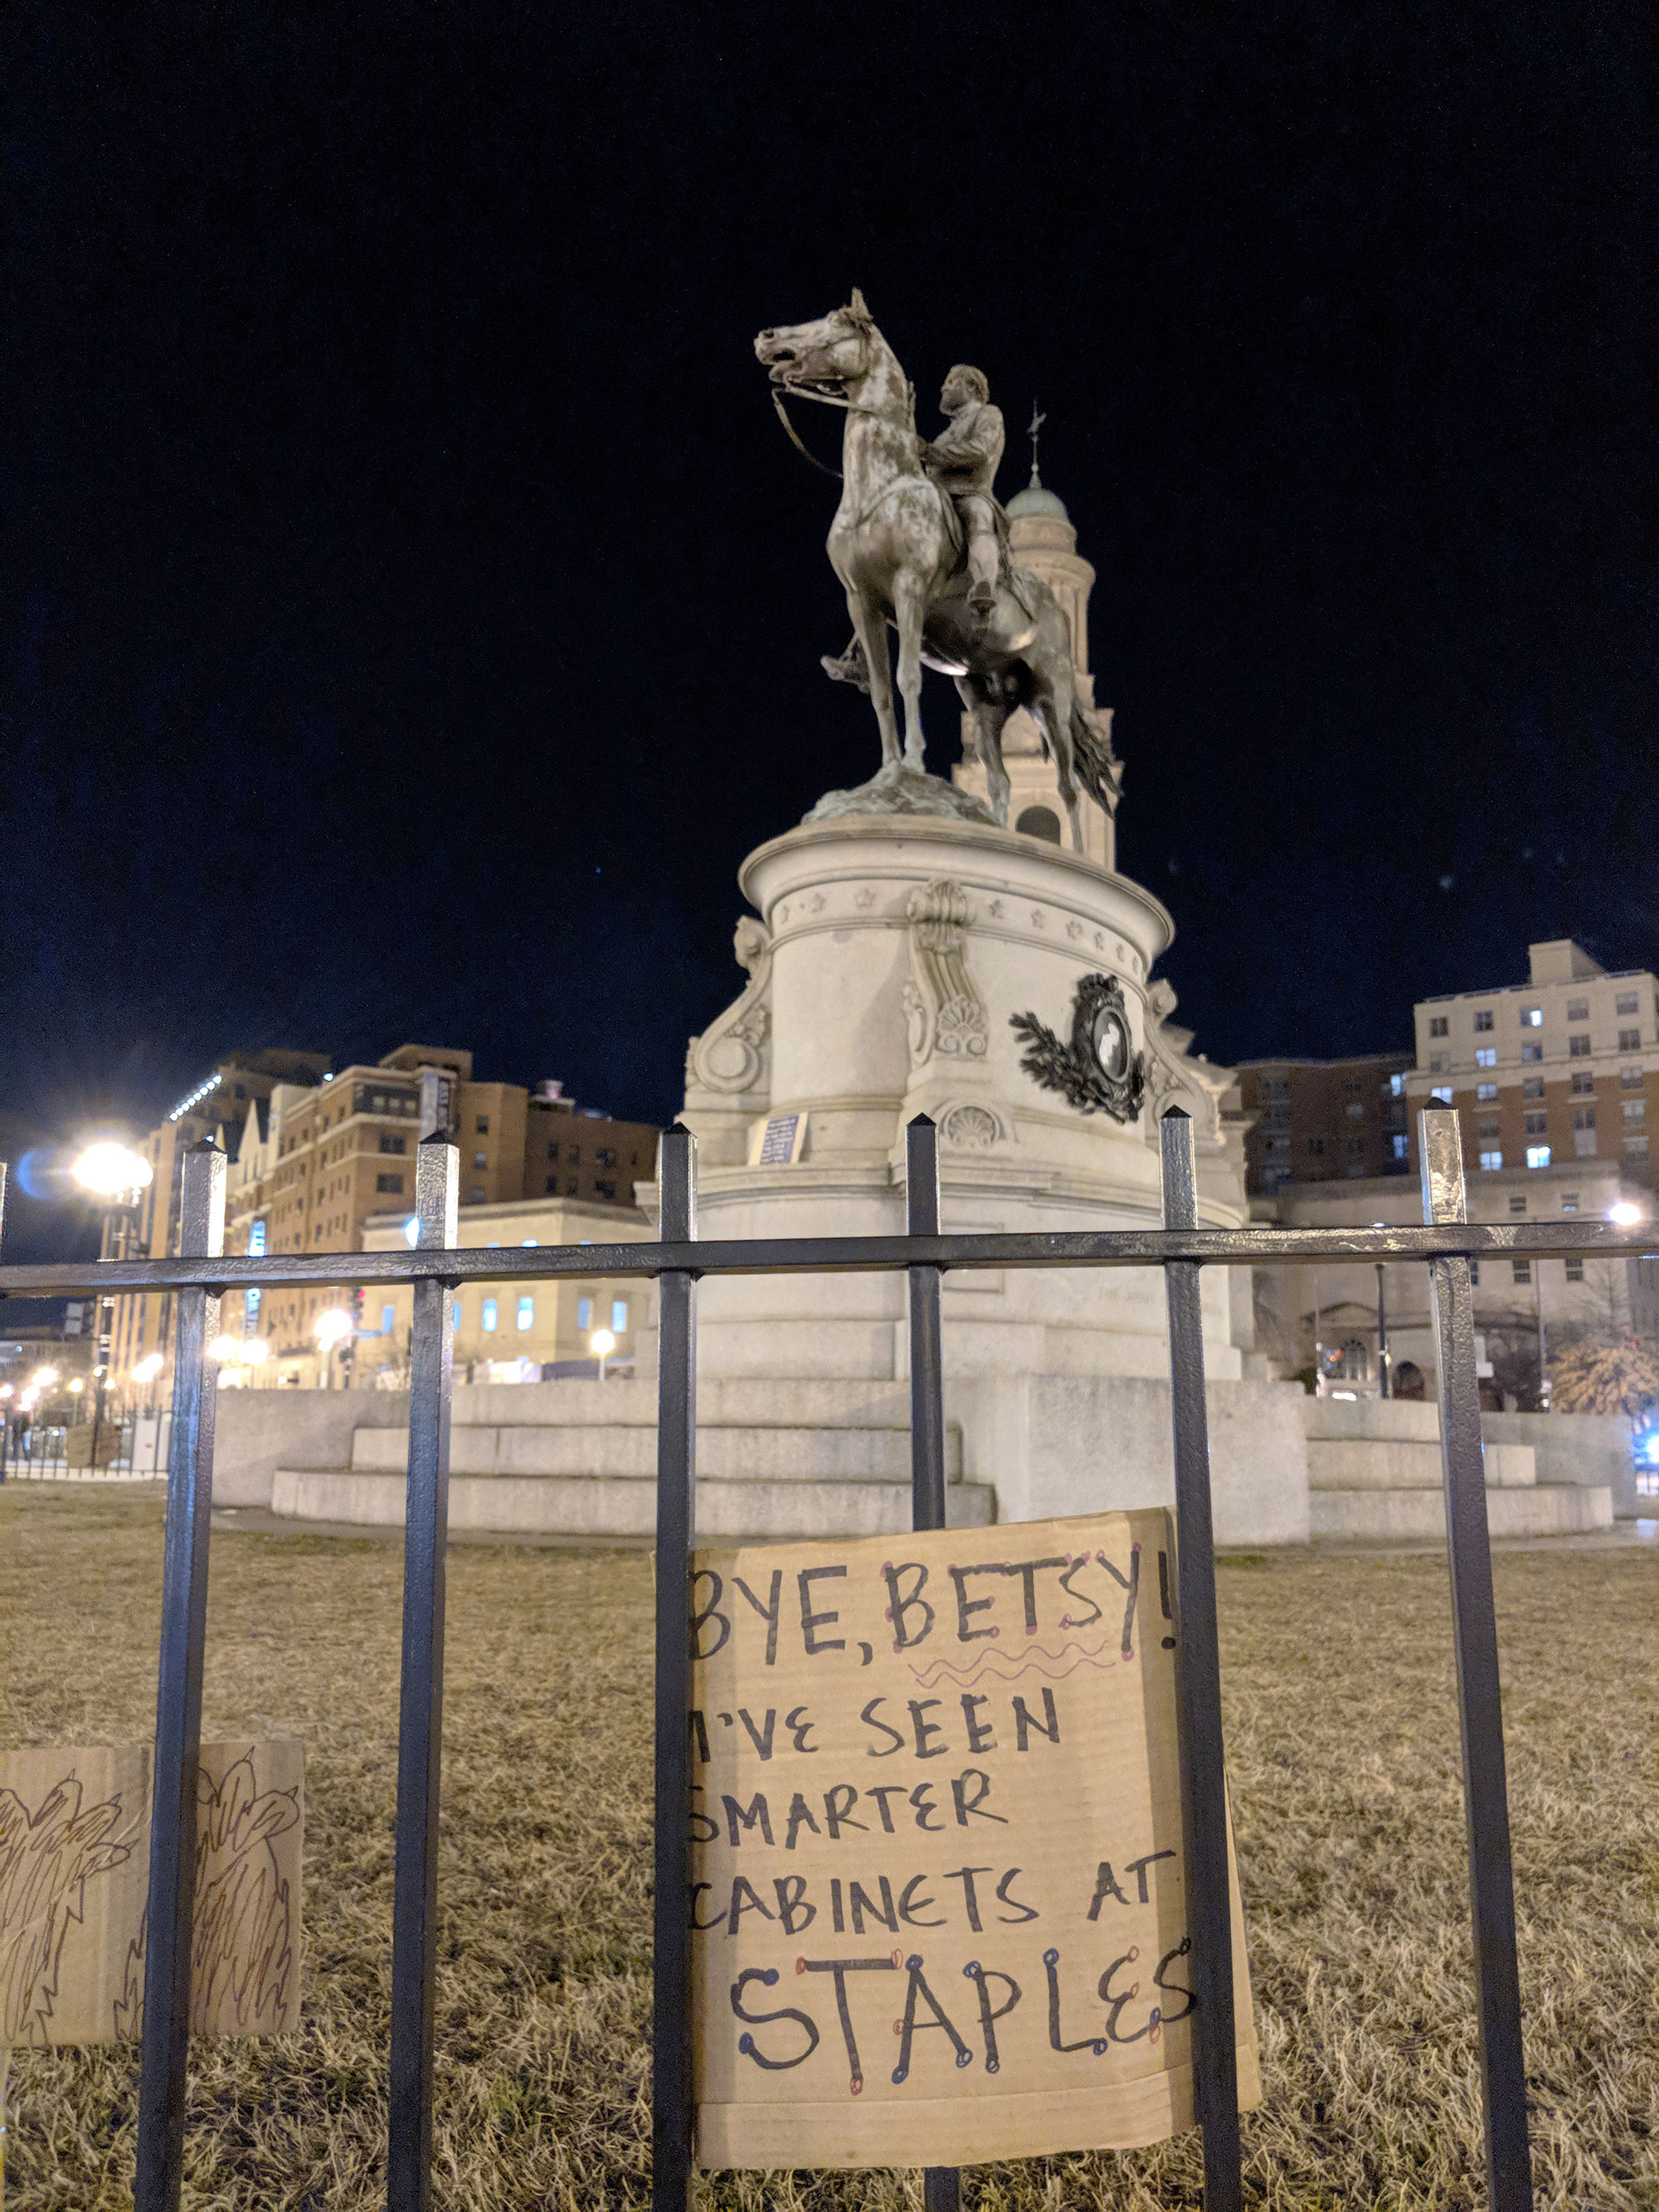 Leftover signs from "March for Our Lives" at Logan Circle in D.C.